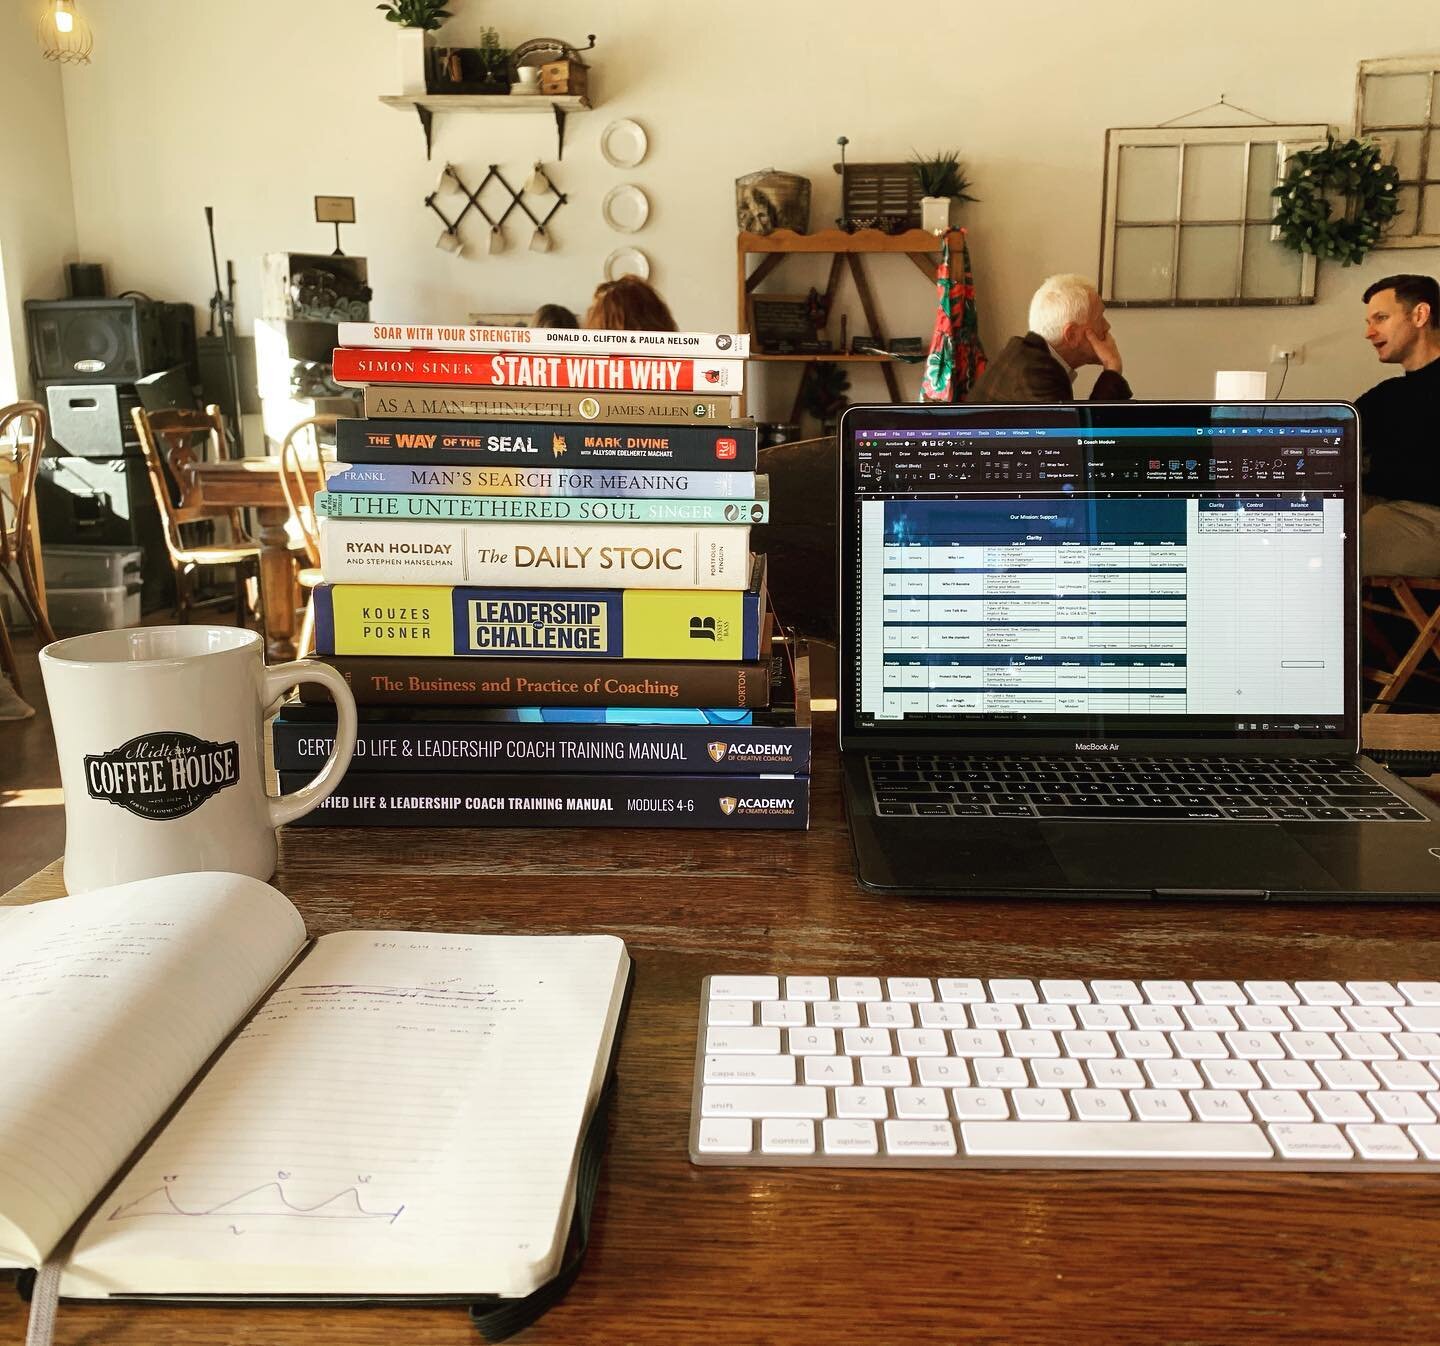 Working hard at @midtowncoffeehouse like most weekday mornings!
&bull;
Here are only a few of the 30 books I am referencing as we build out a 12 model course for finding Clarity, Control and Balance.
&bull; 
January is all about self discovery, purpo